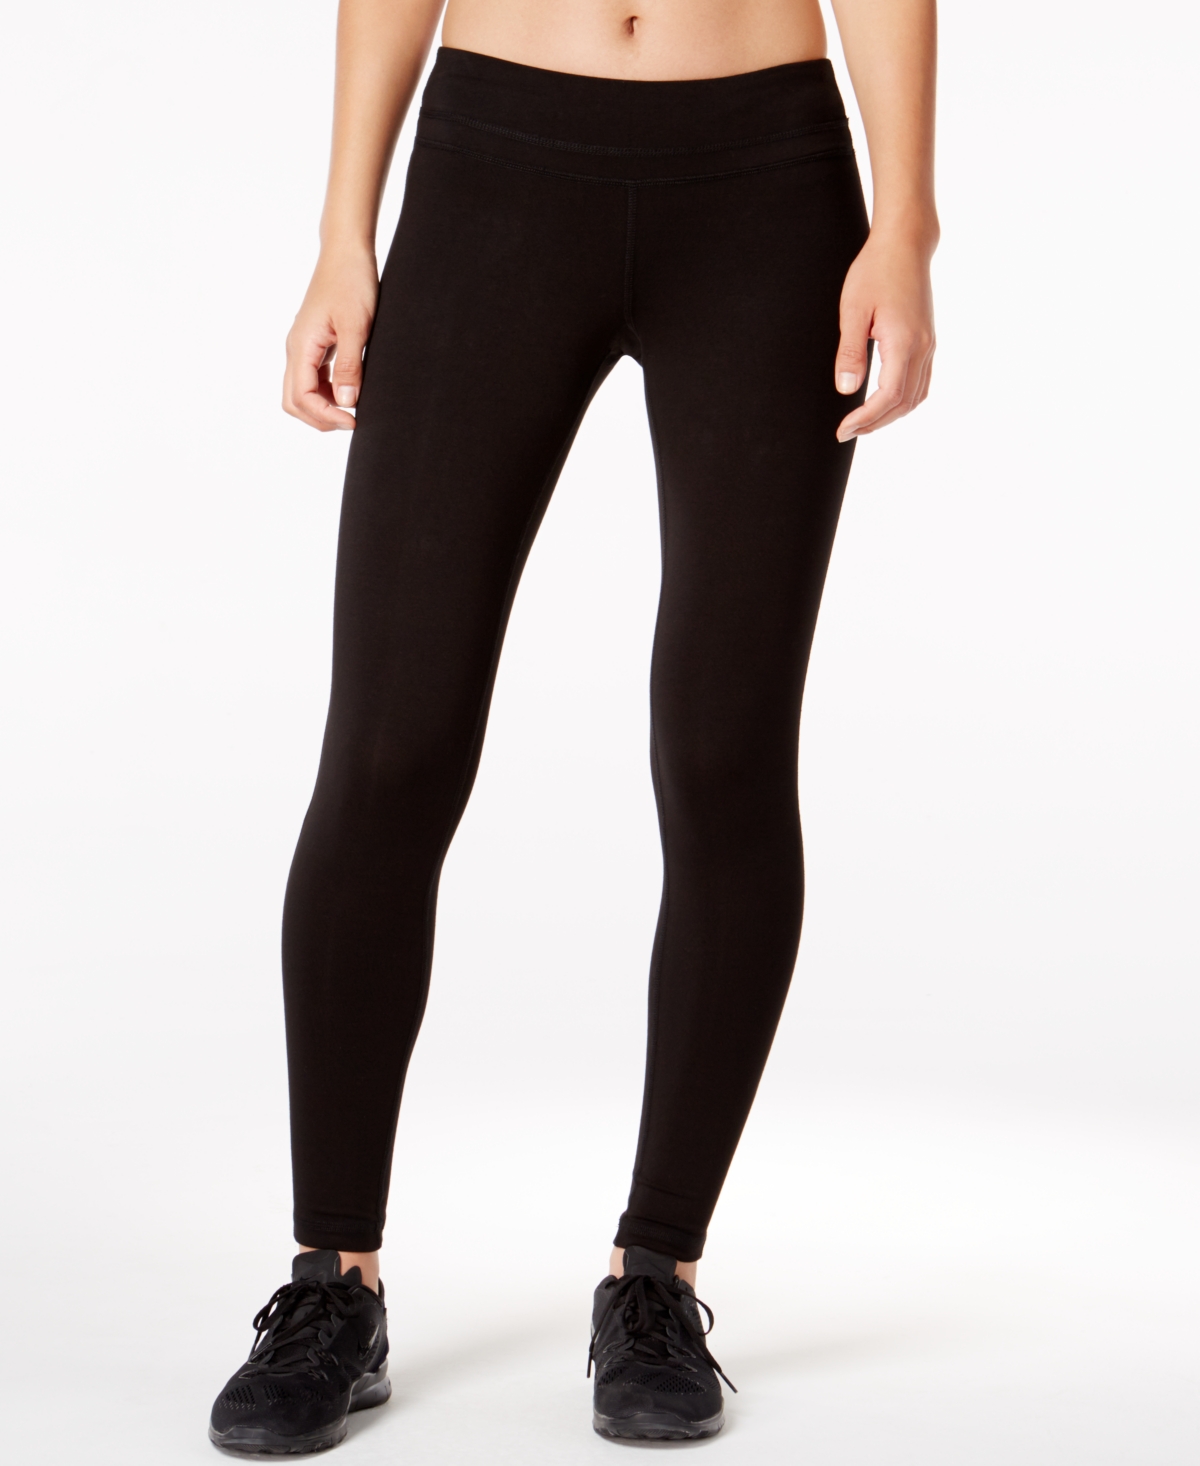 Women's Essentials Stretch Active Full Length Cotton Leggings, Created for Macy's - Black